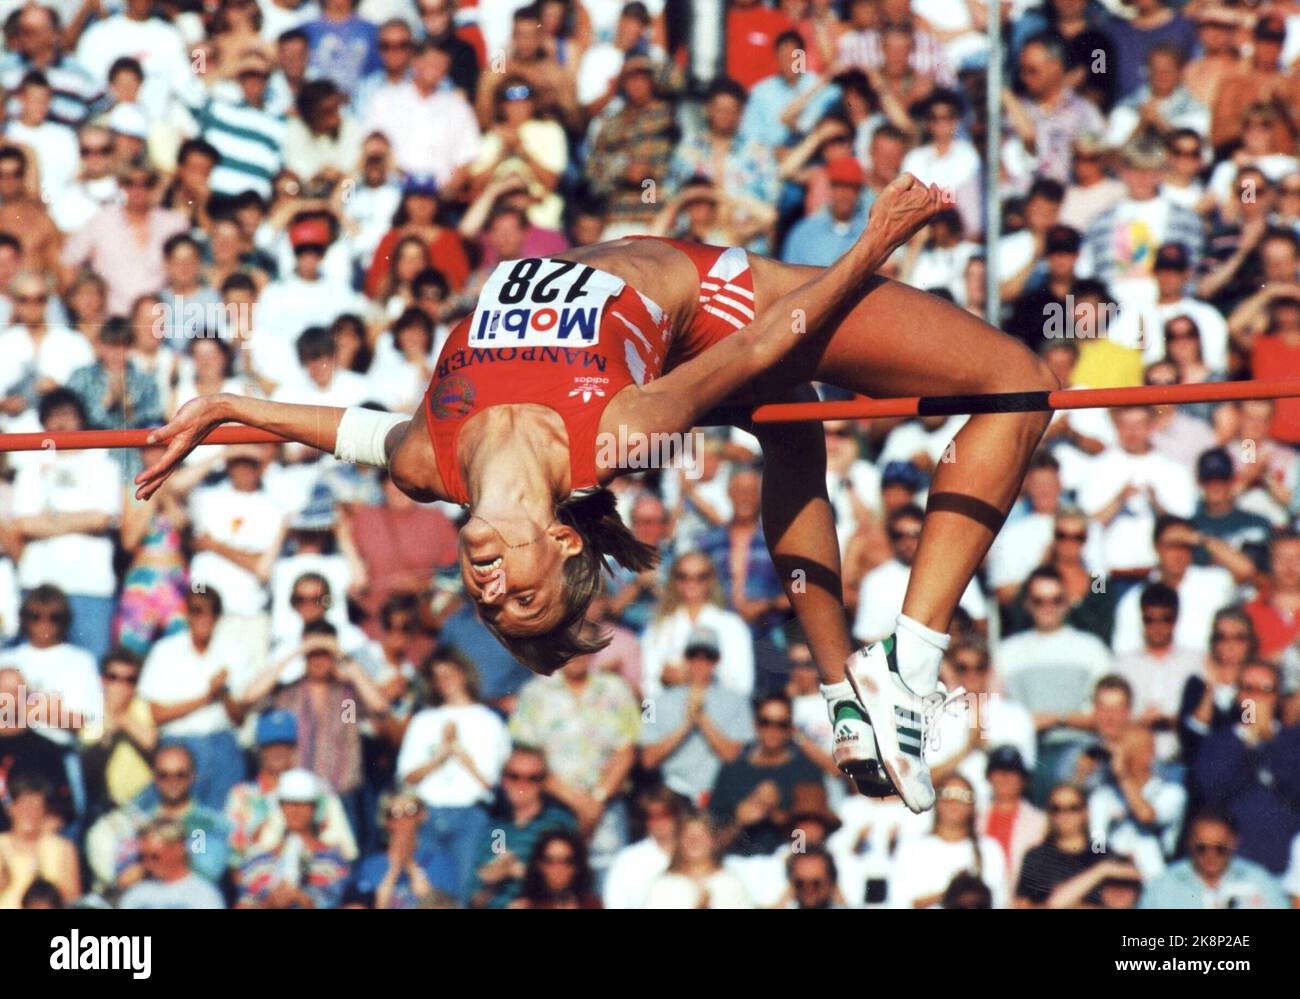 Hanne Haugland Action Height, Bislet Games May 2, 1997. Photo: Johnny Syversen Code 379 / Scan photo Stock Photo